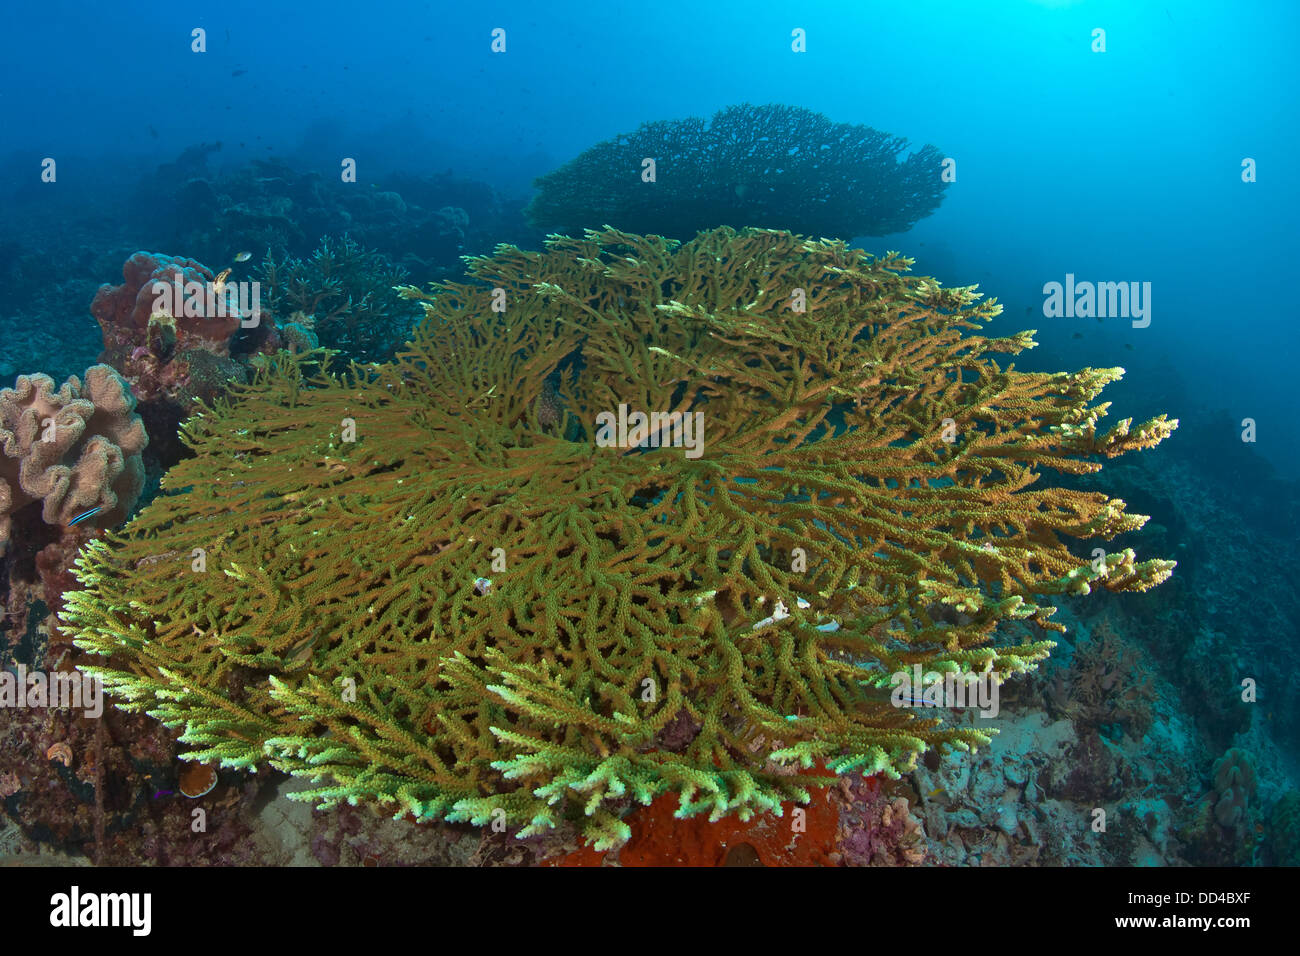 Seascape view of large green table coral, Acropora sp., Raja Ampat, Indonesia. Stock Photo